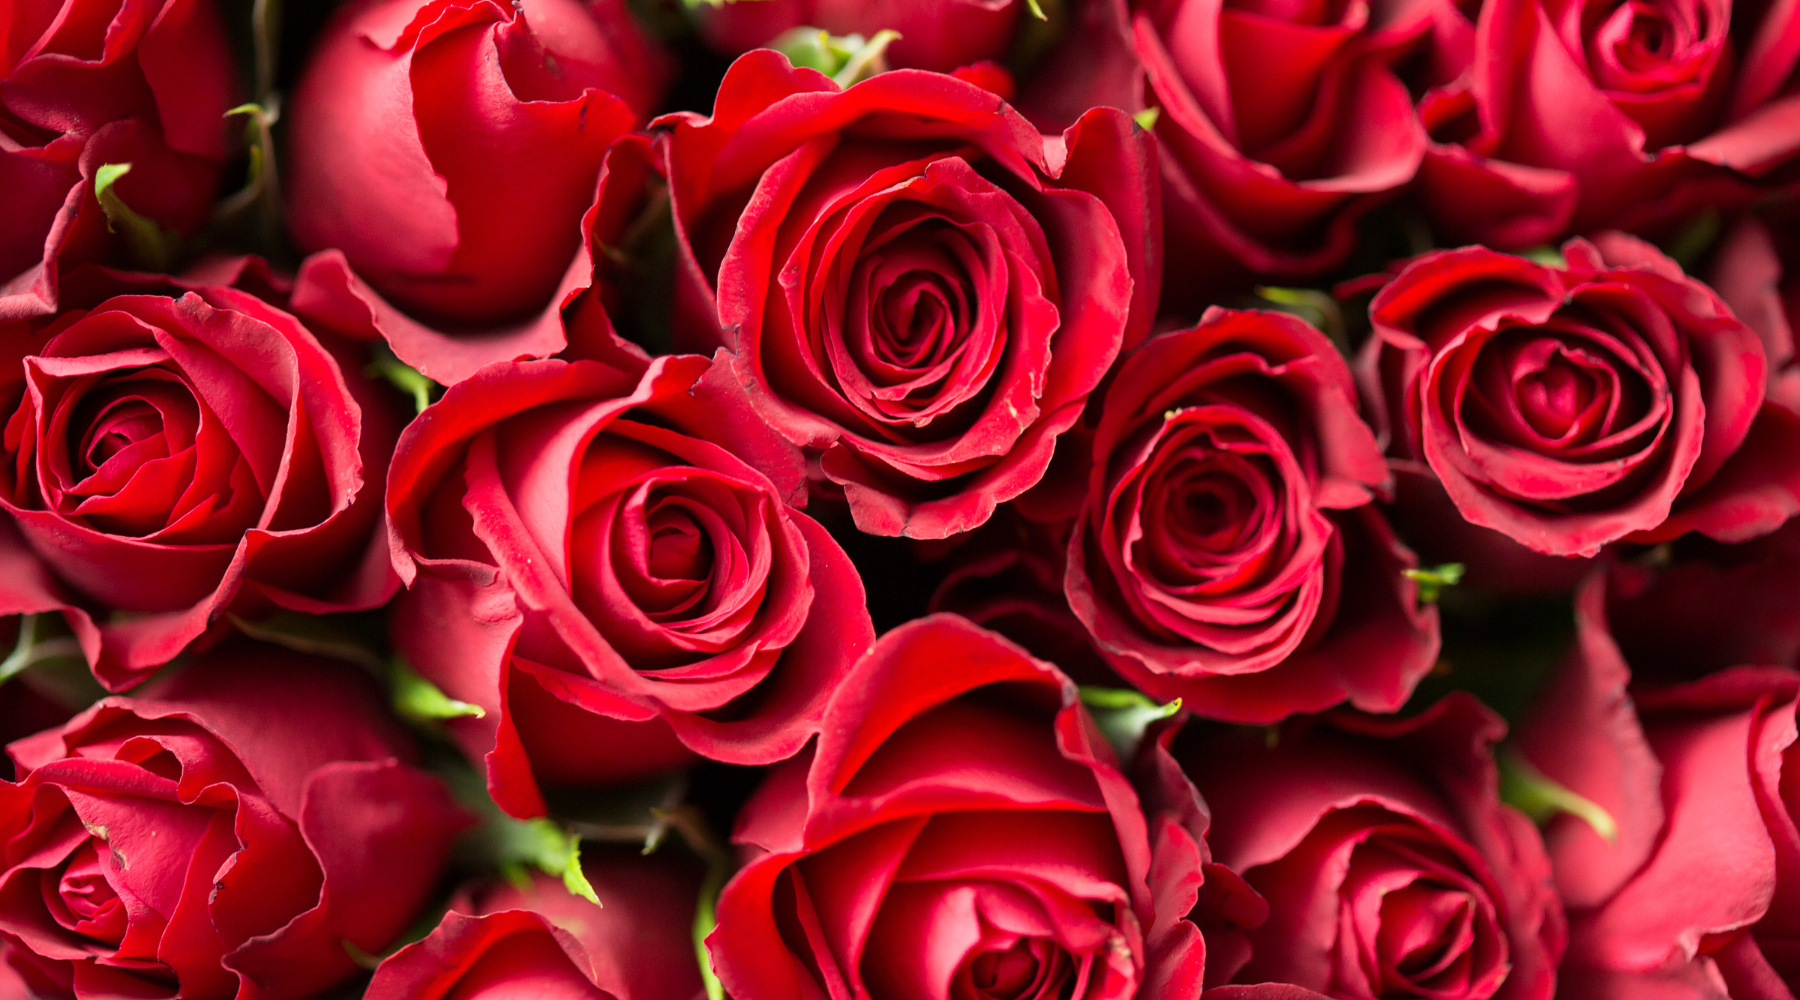 Image of red roses for when to send flowers Brisbane for valentines day